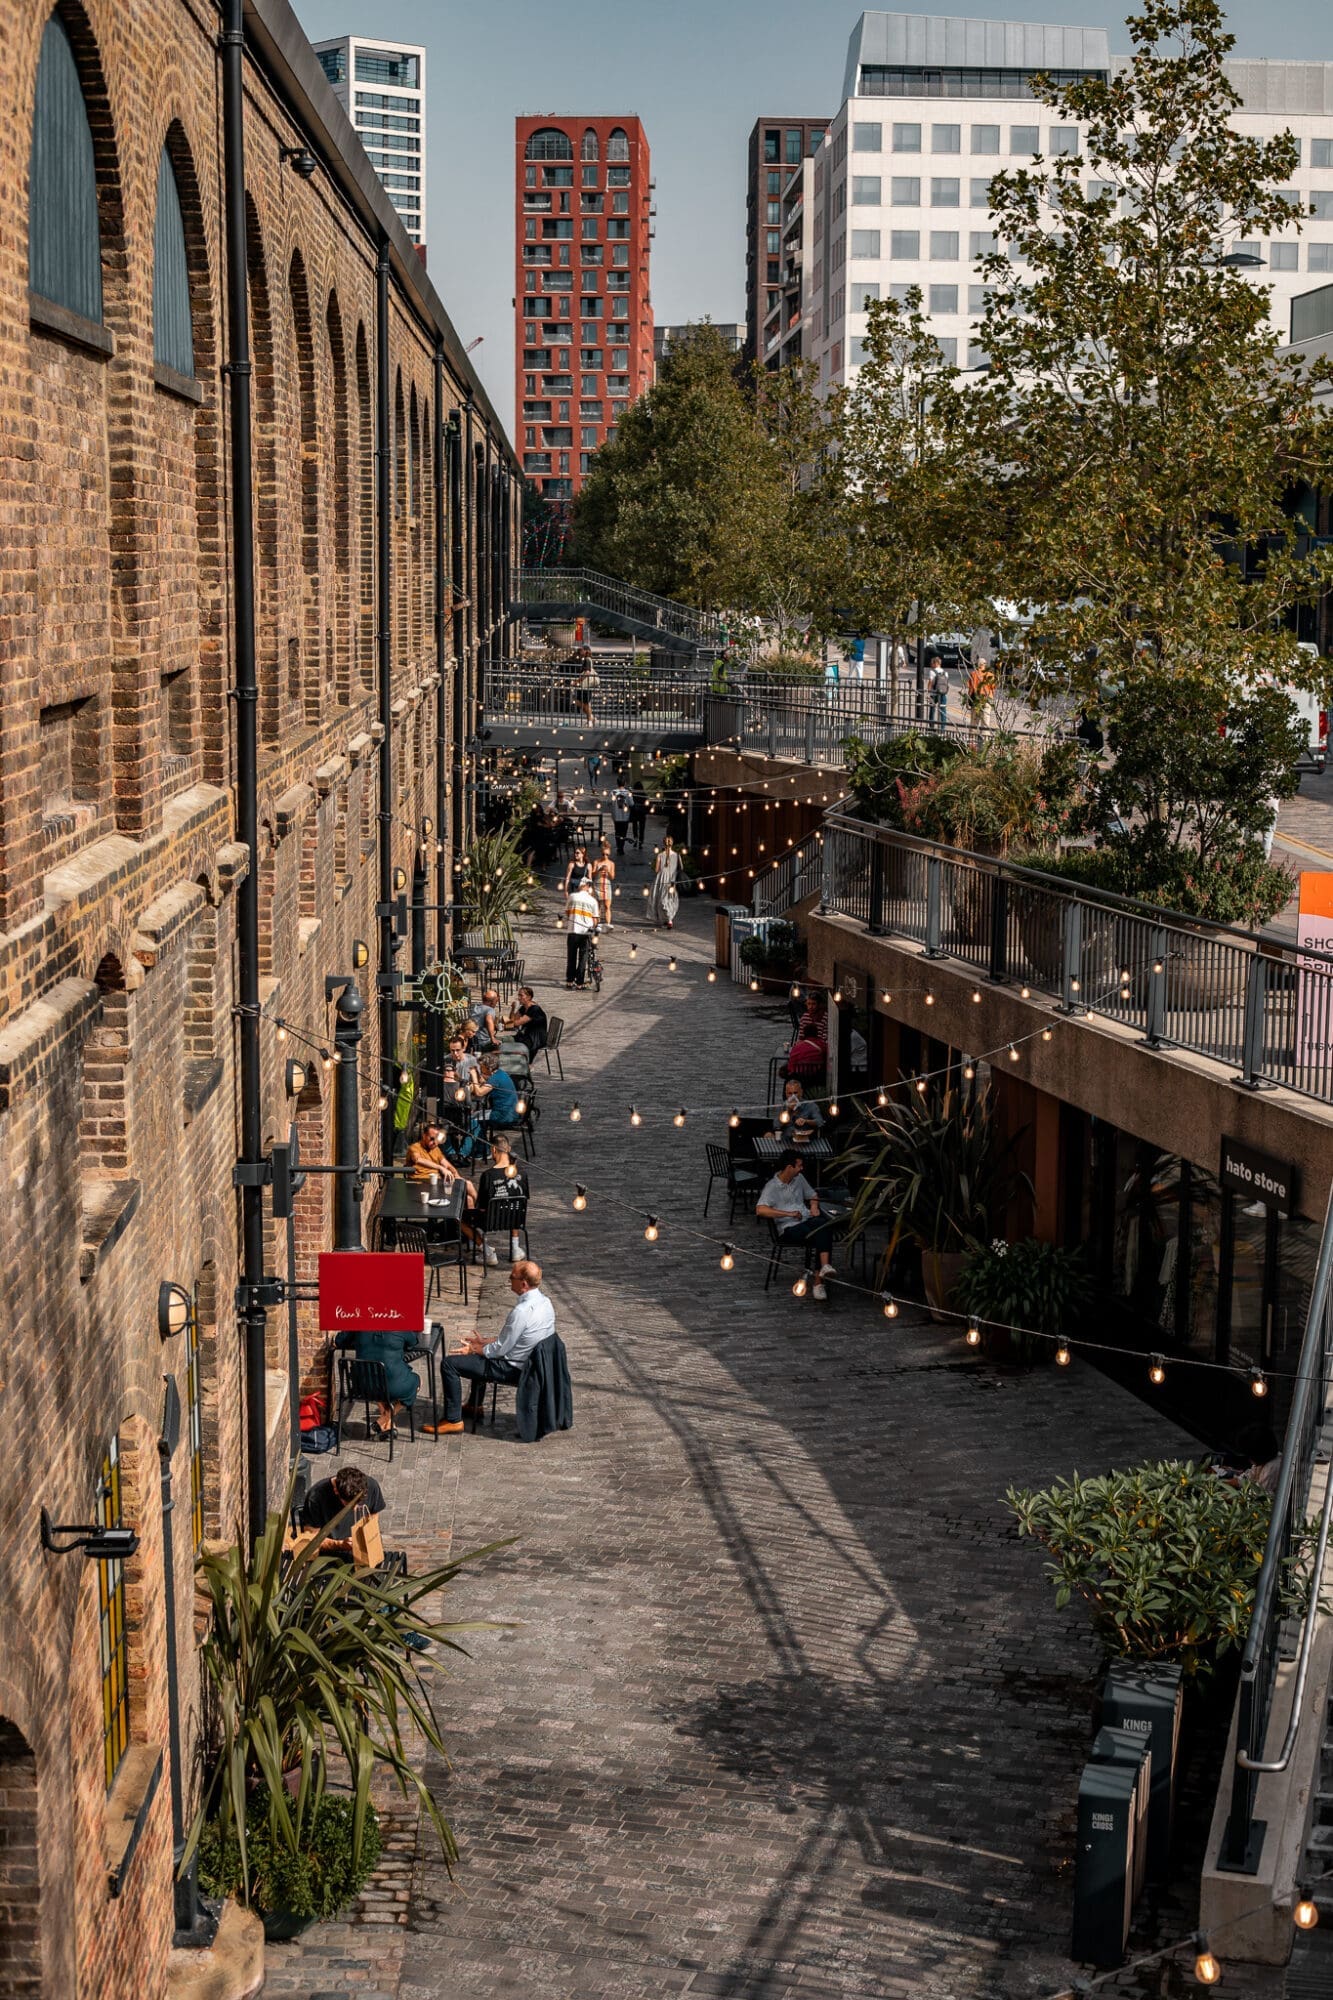 A narrow alley in Coal Drops Yard, where people sit and eat and browse the shops under a canopy of festoon lights.